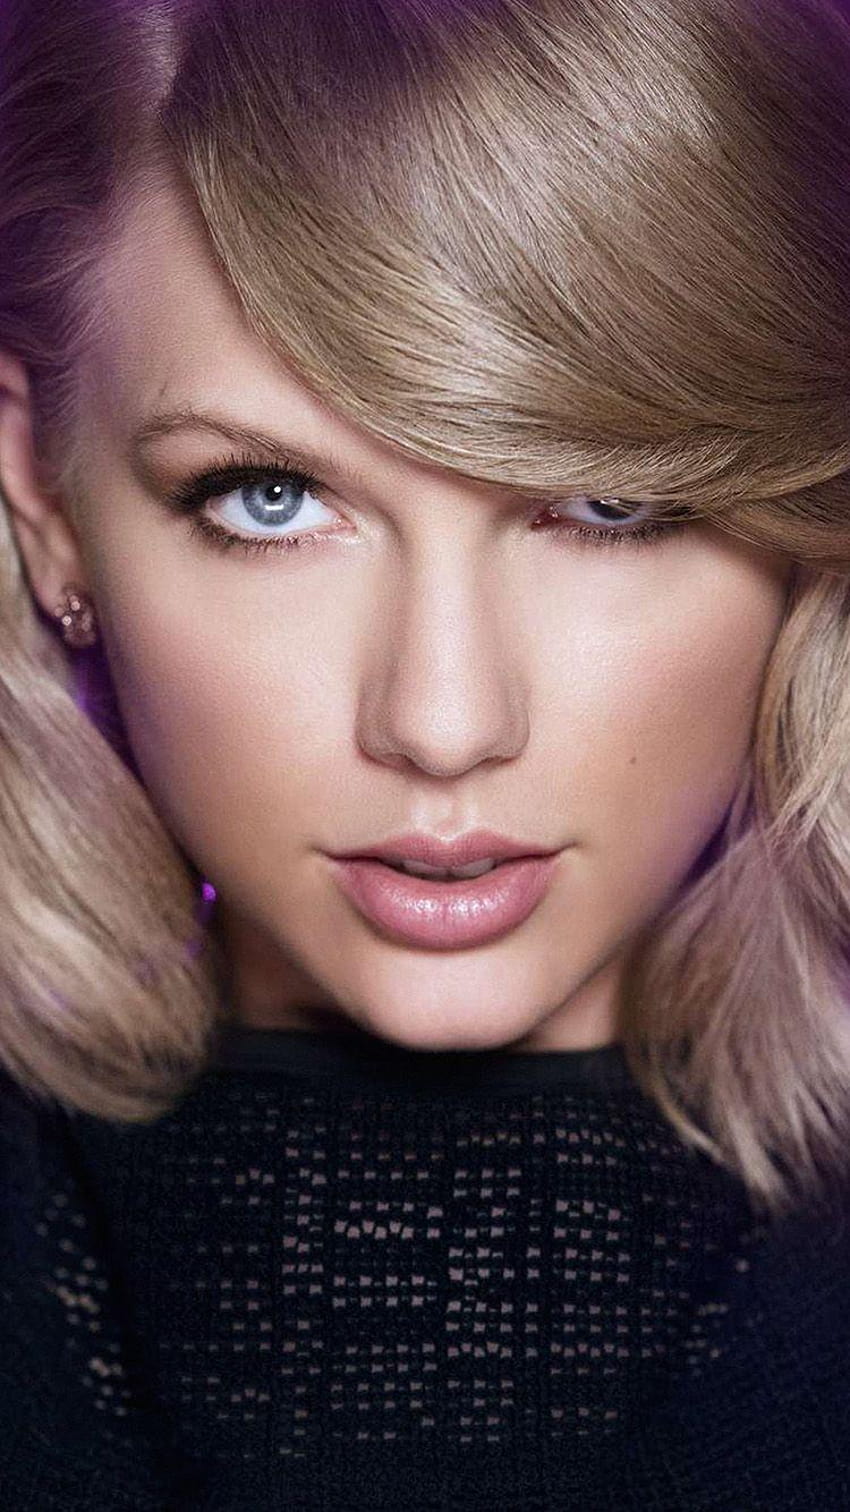 TAYLOR SWIFT FACE MUSIC CELEBRITY IPHONE, taylor swift mobile HD phone wallpaper